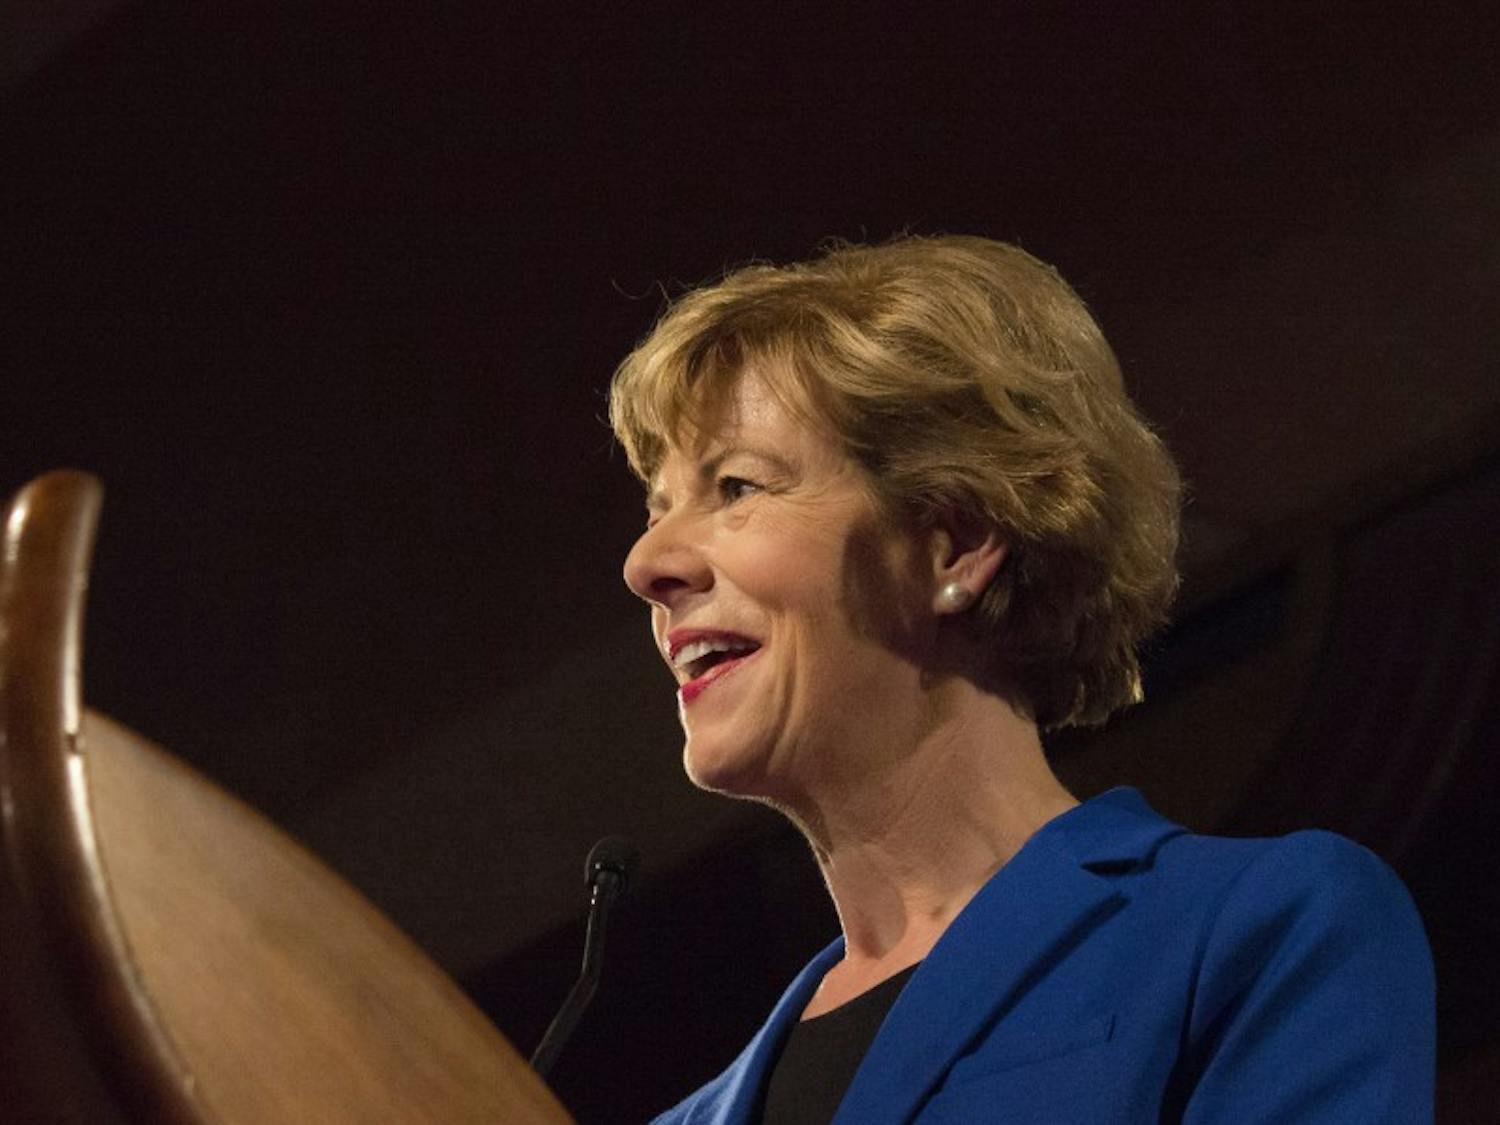 Democrats hold onto their Wisconsin seat in the U.S. Senate, as Tammy Baldwin cruises to victory.